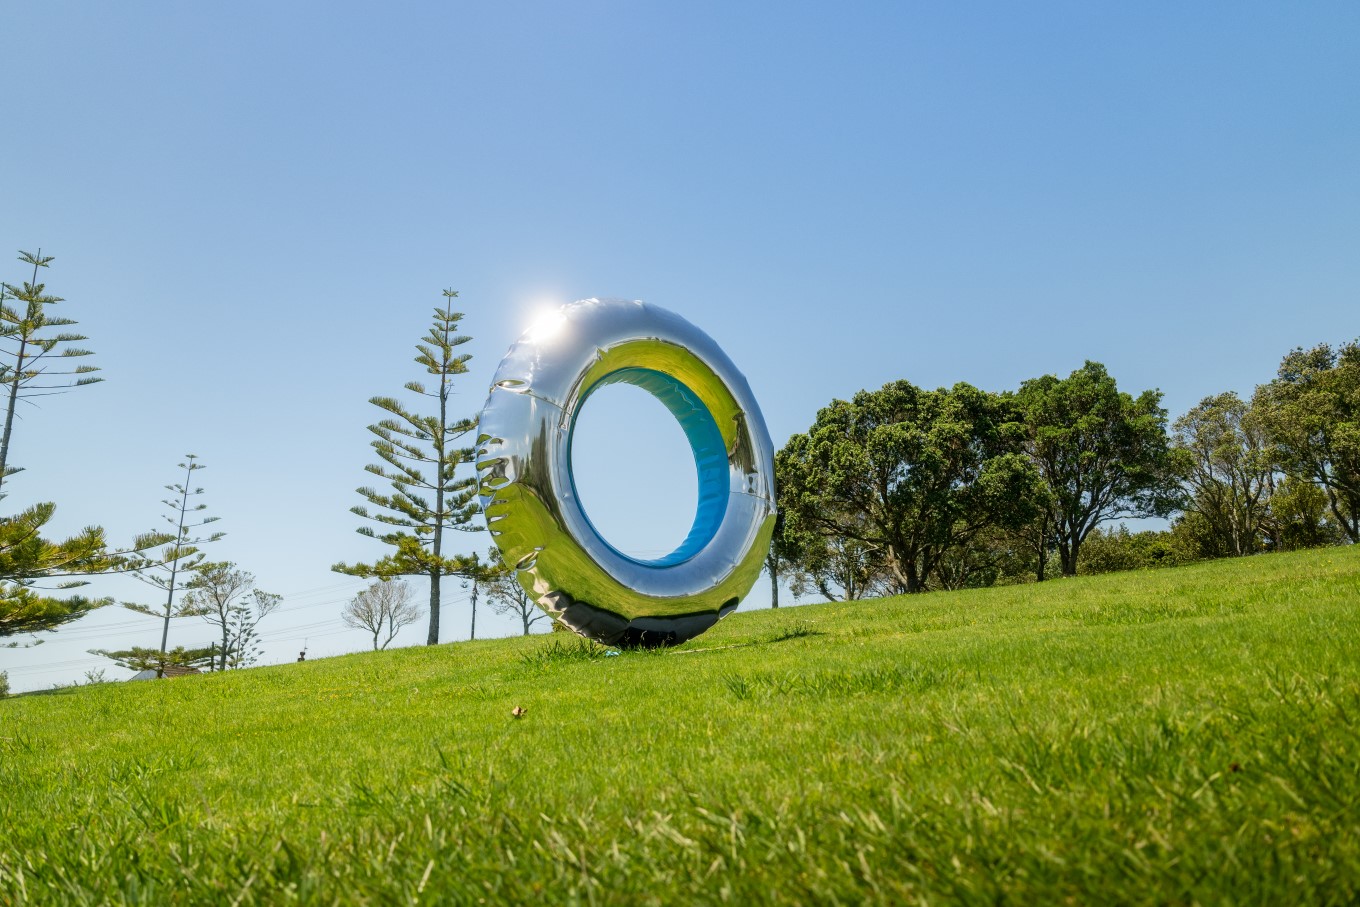 If you’re heading past Oruamo Domain in Glenfield look out for David McCracken’s playful sculpture Soft Focus … Summer’s Day rolling down the hill.